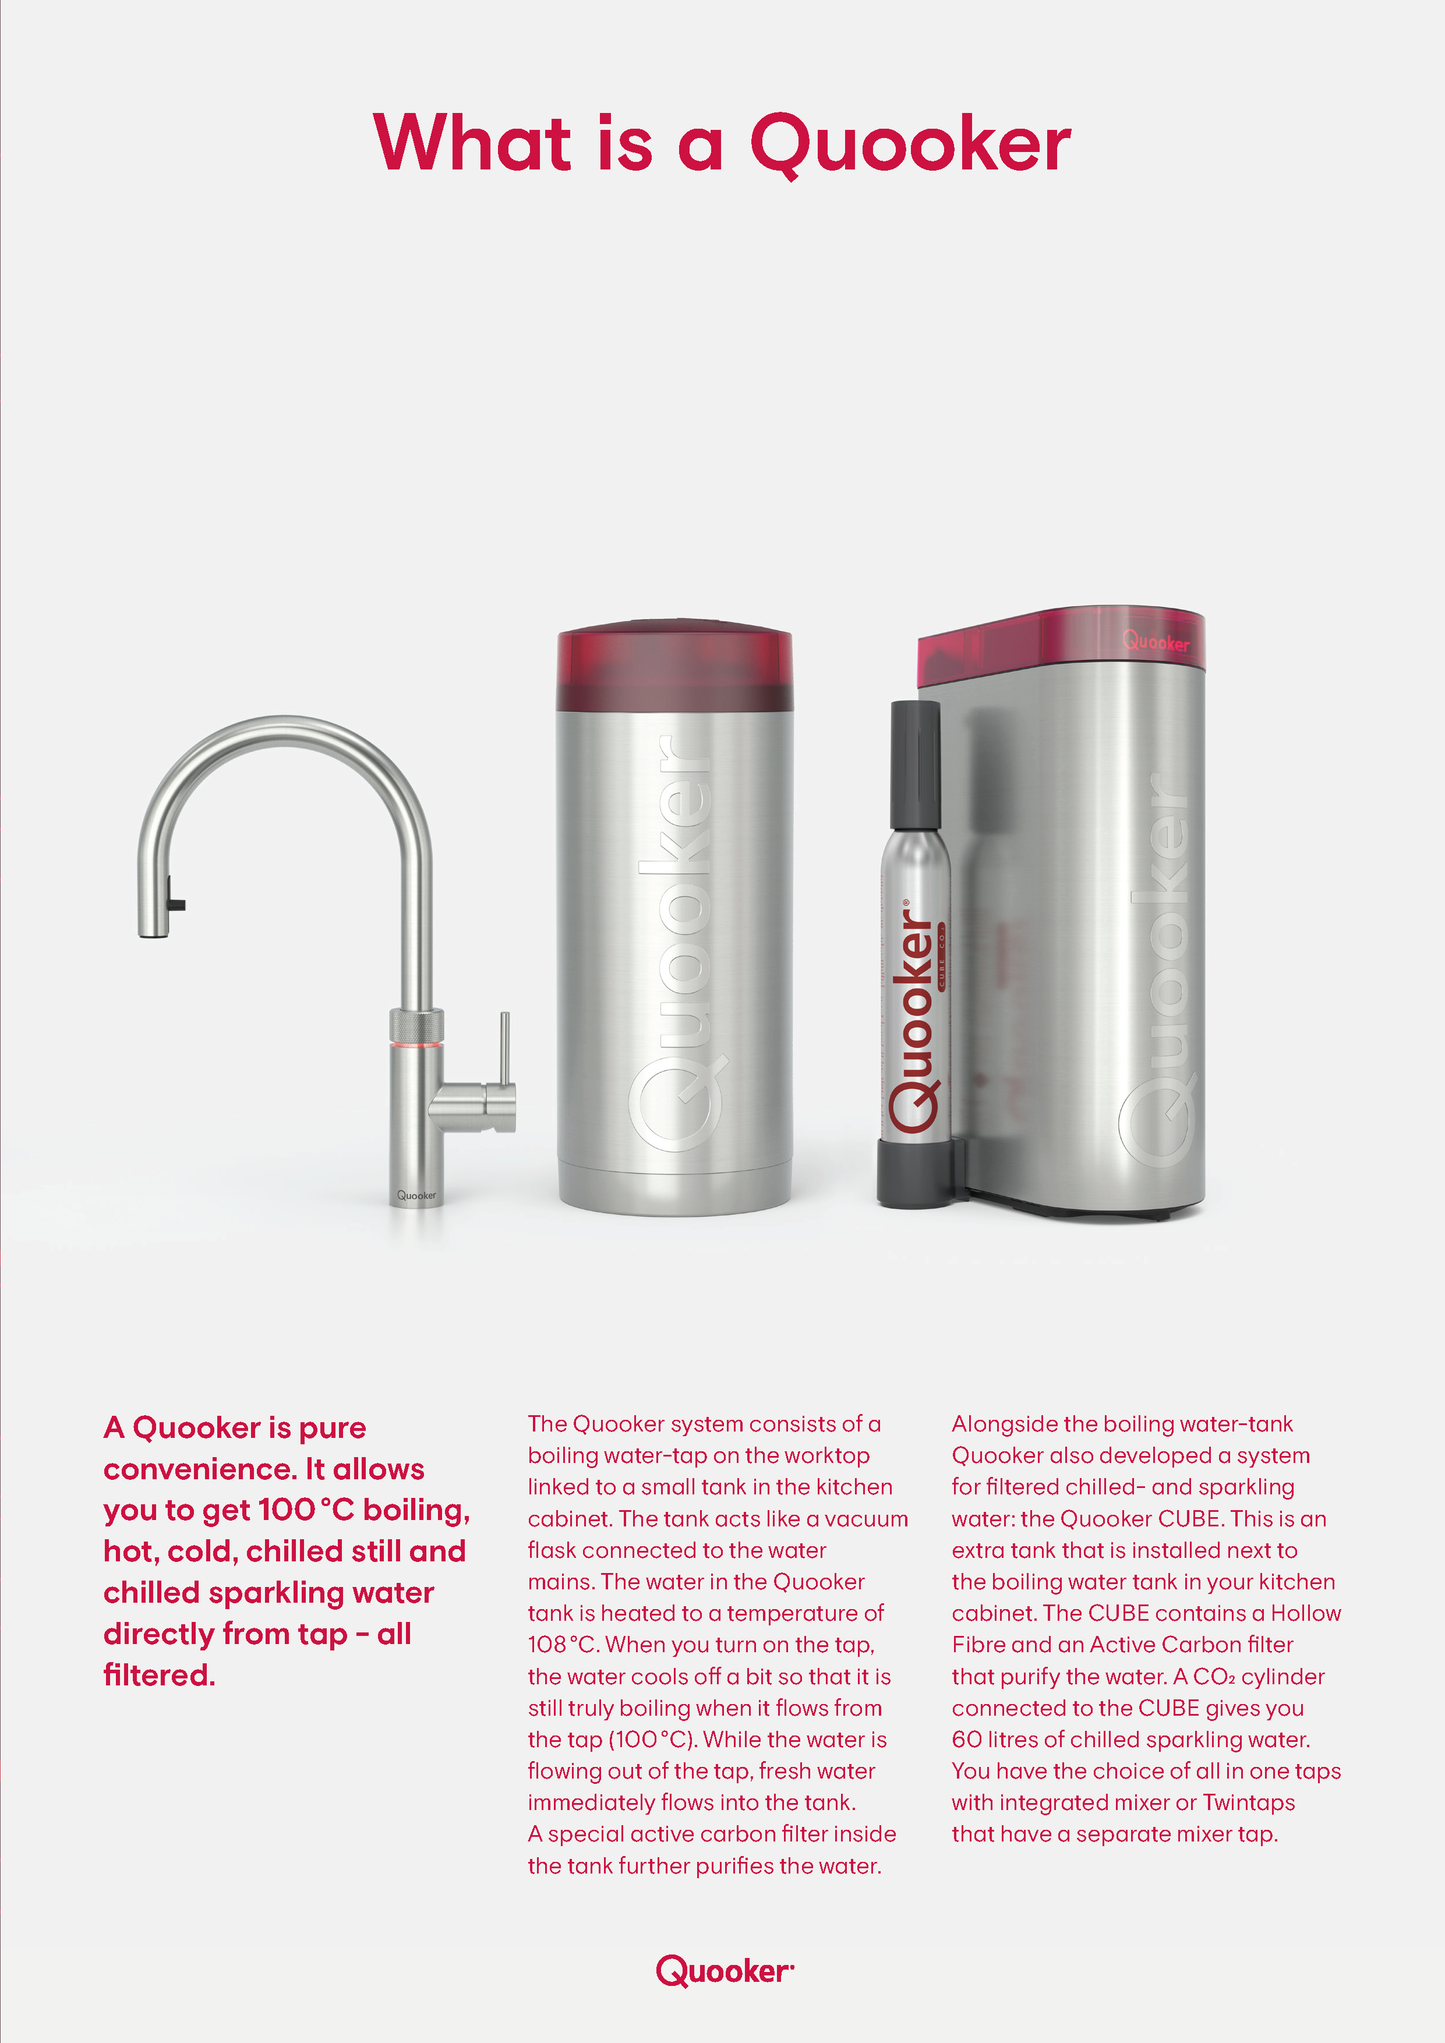 【QUOOKER】FUSION SQUARE 滾水水龍頭 Instant Hot /or Warm /or Chilled /or Sparkling Water Tap | From Netherlands |